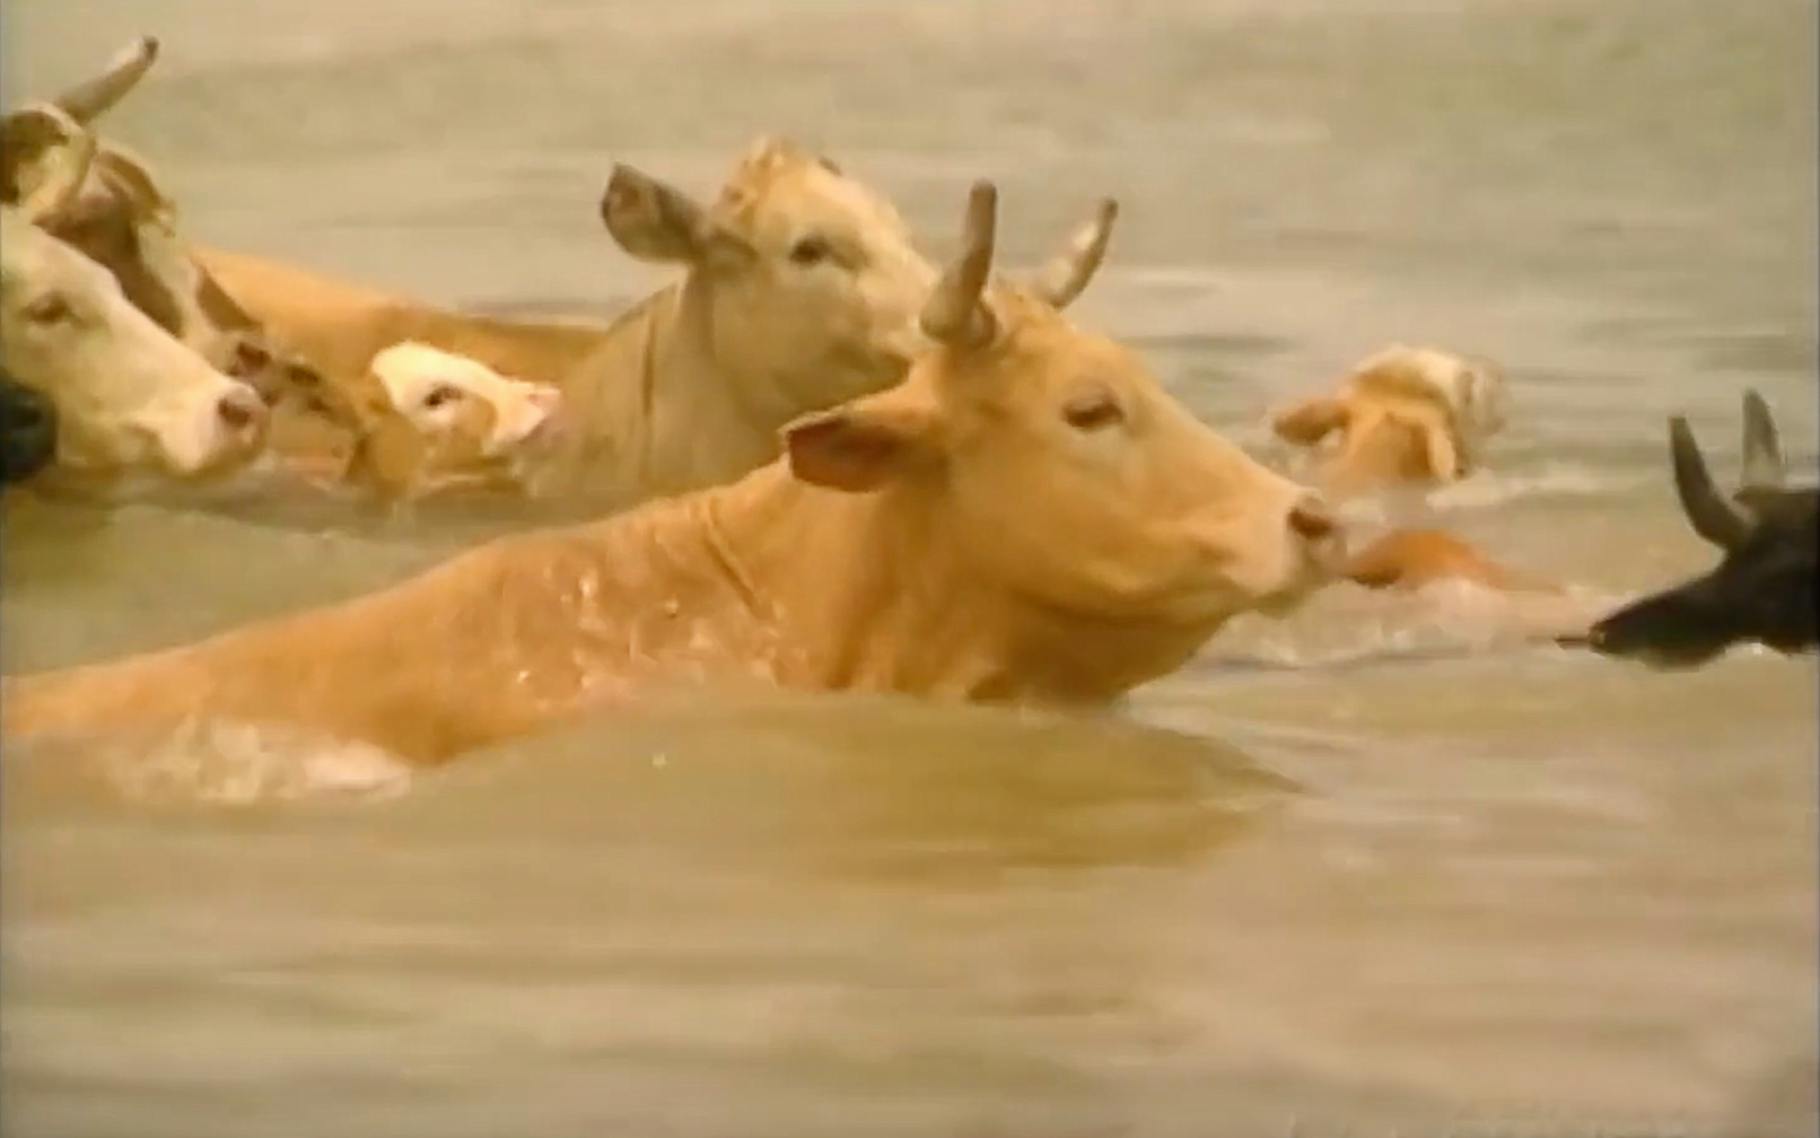 You Can Lead Cows to Water, But Can You Make ’Em Swim the Colorado?